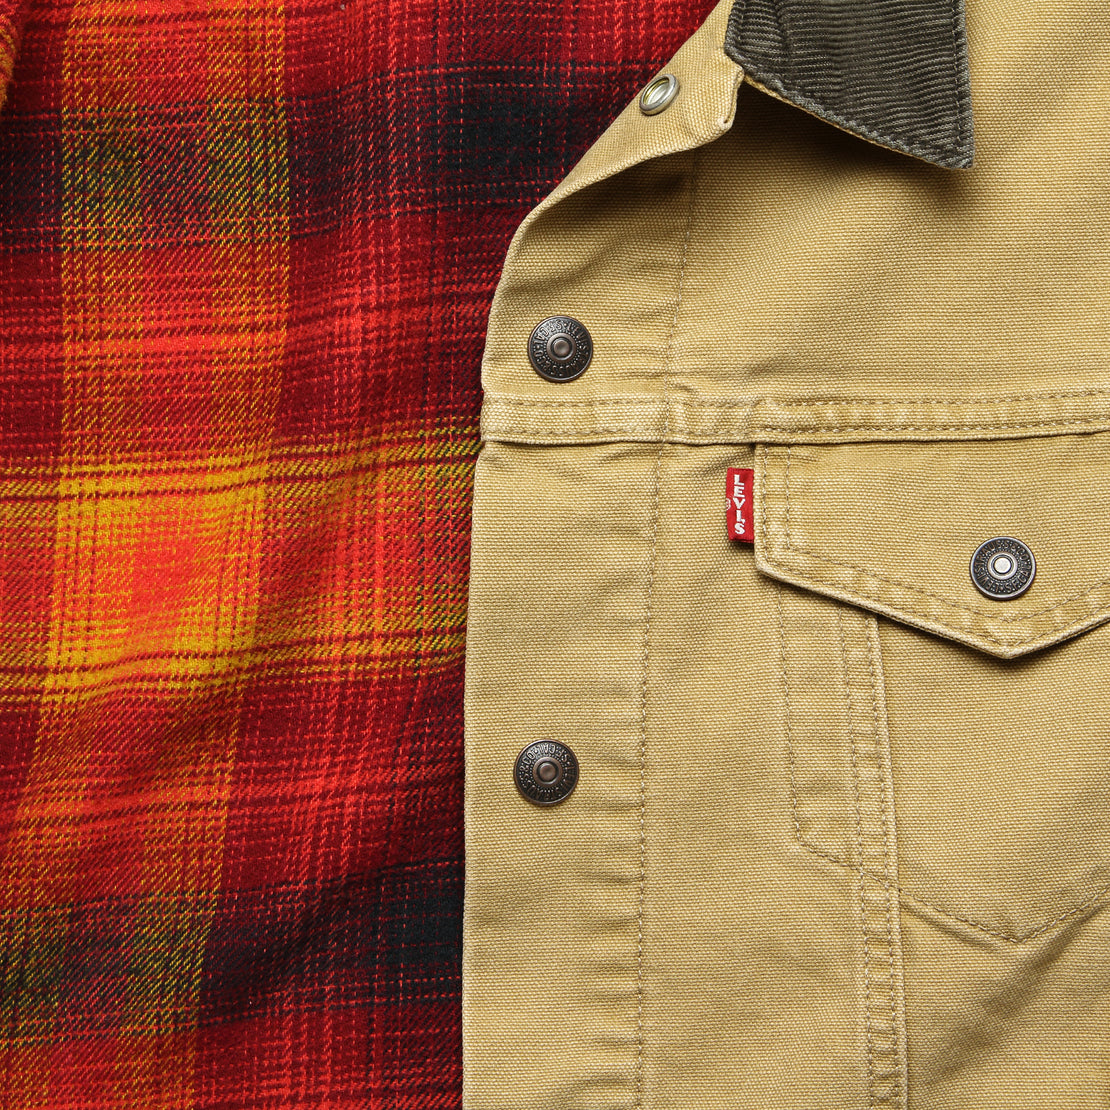 Lined Trucker Jacket - Dijon Canvas - Levis Premium - STAG Provisions - Outerwear - Coat / Jacket